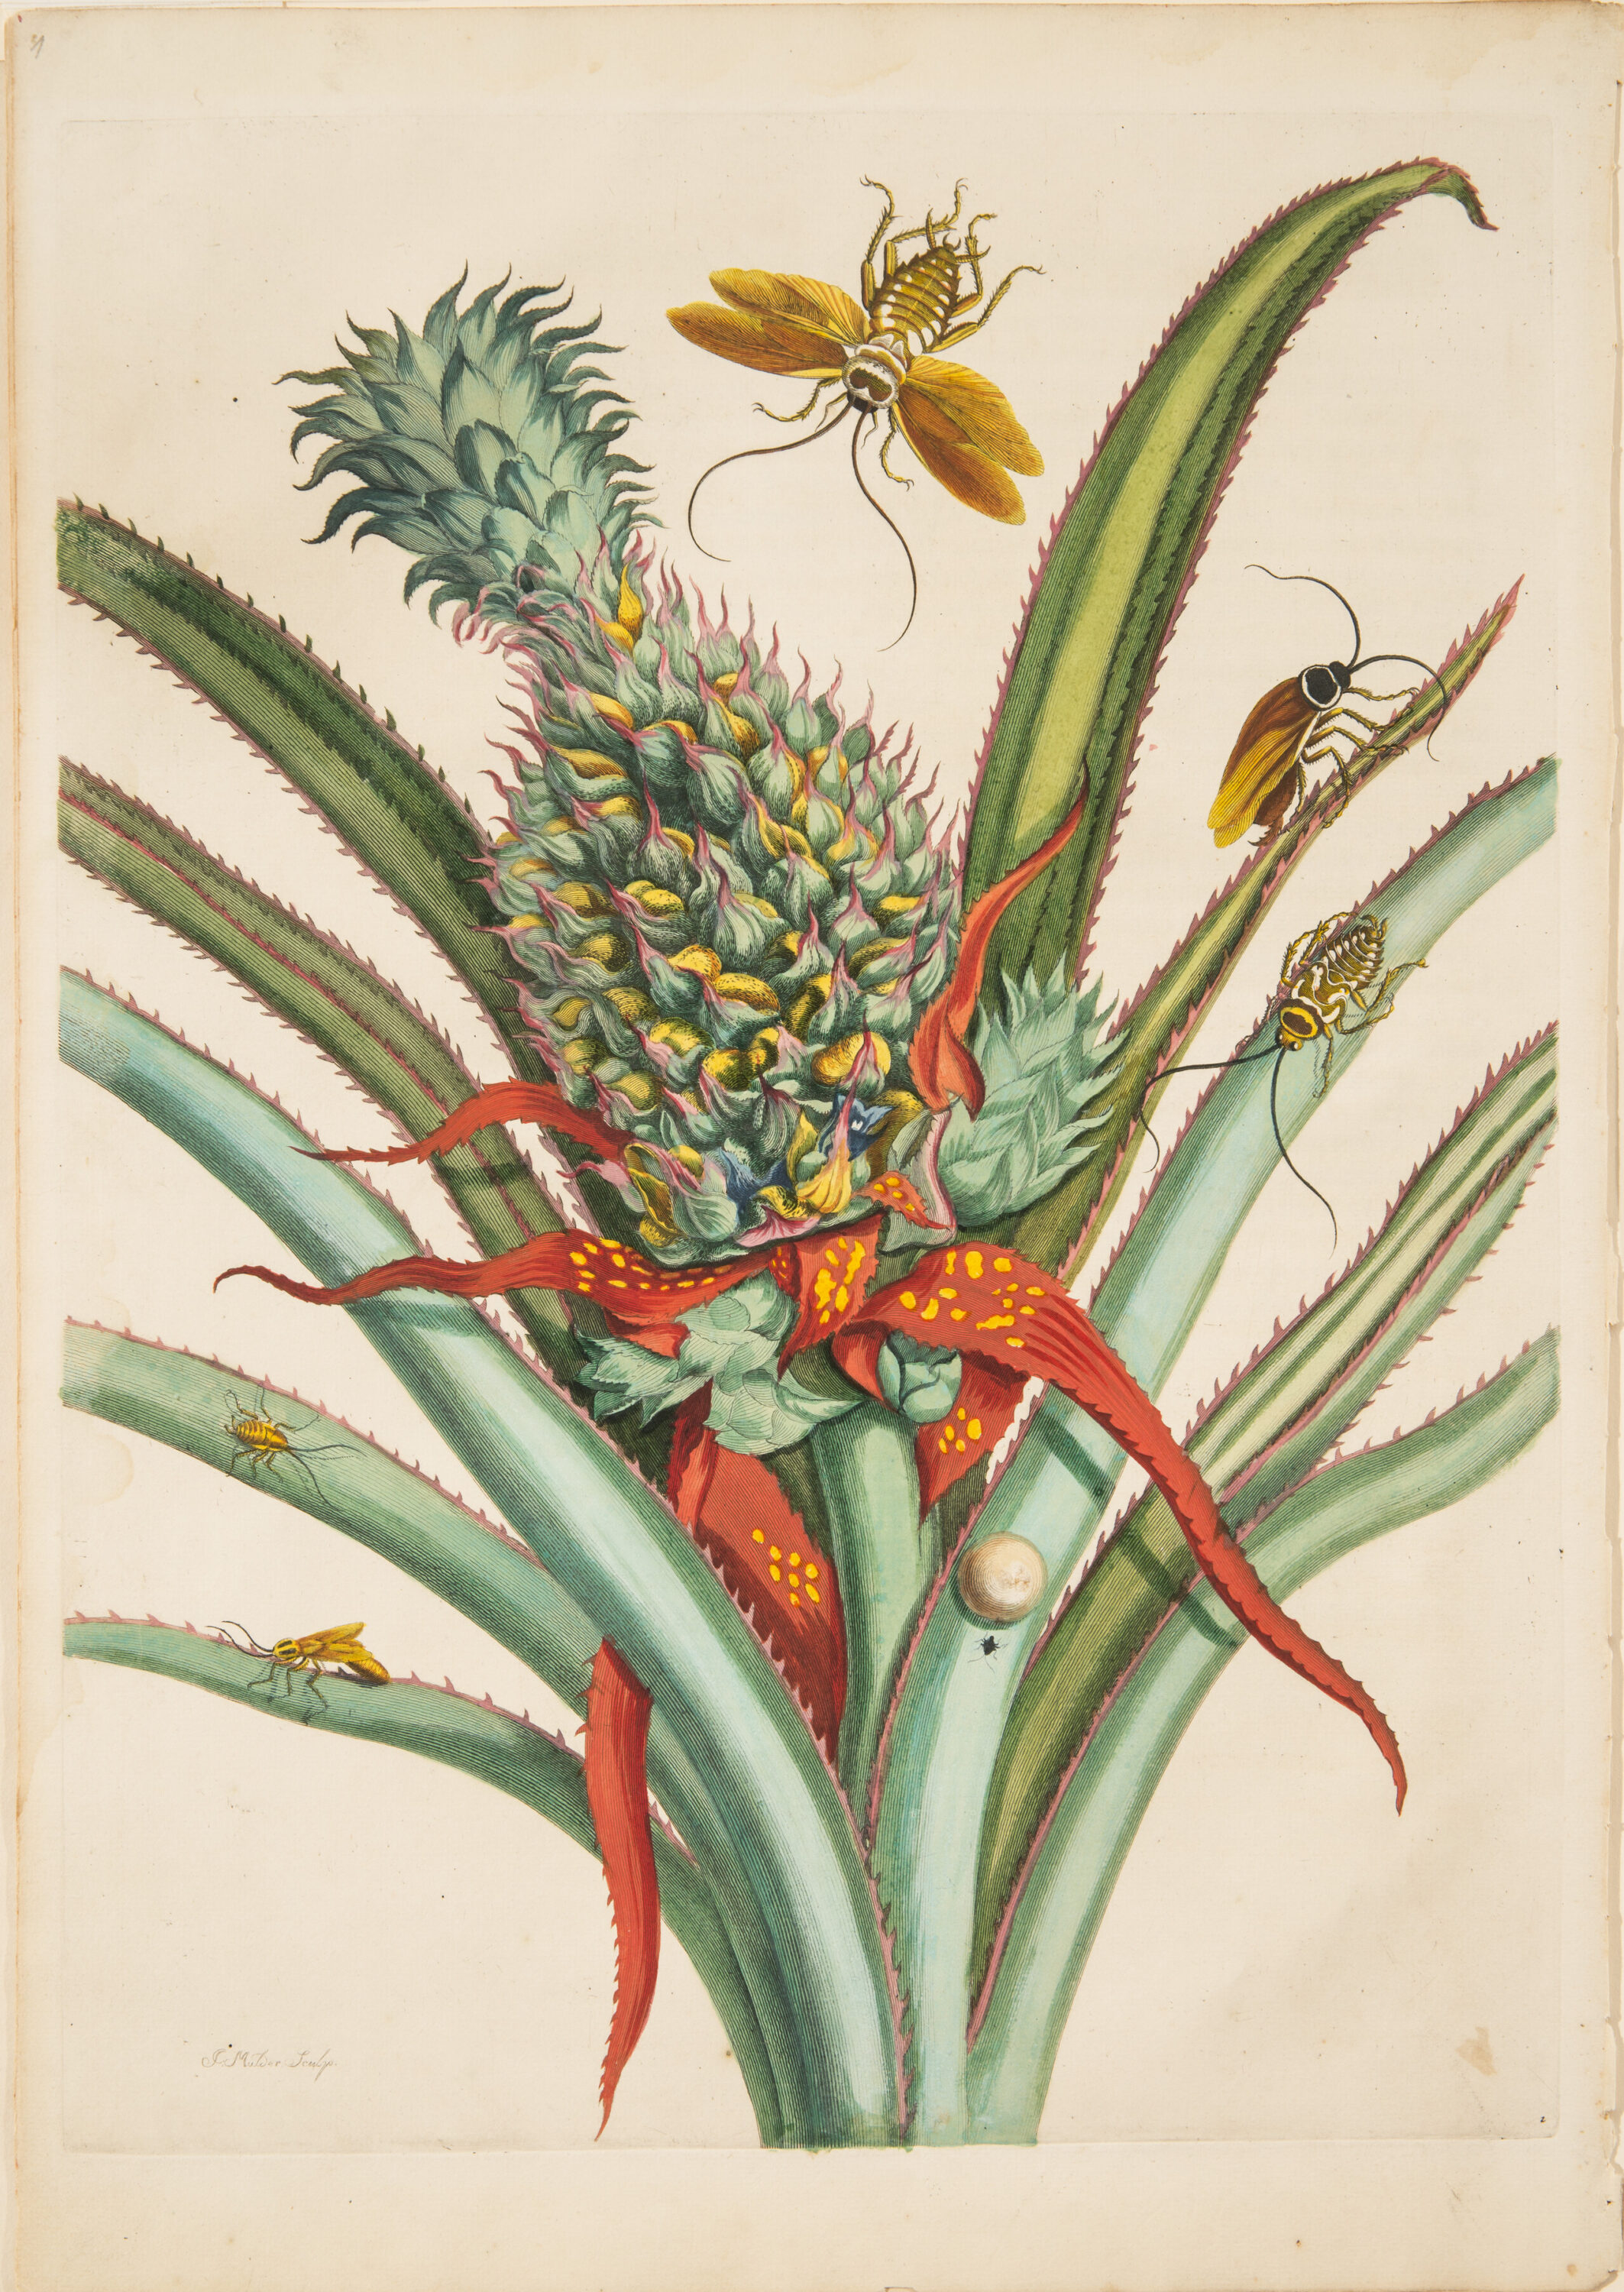 A large green-and-gold pineapple occupies the center of a detailed engraving. Unharvested, it rises amid red and green blade-like, spiny leaves, which radiate out from the main stem. Cockroaches at various stages of development rove the plant, while a winged adult hovers above.